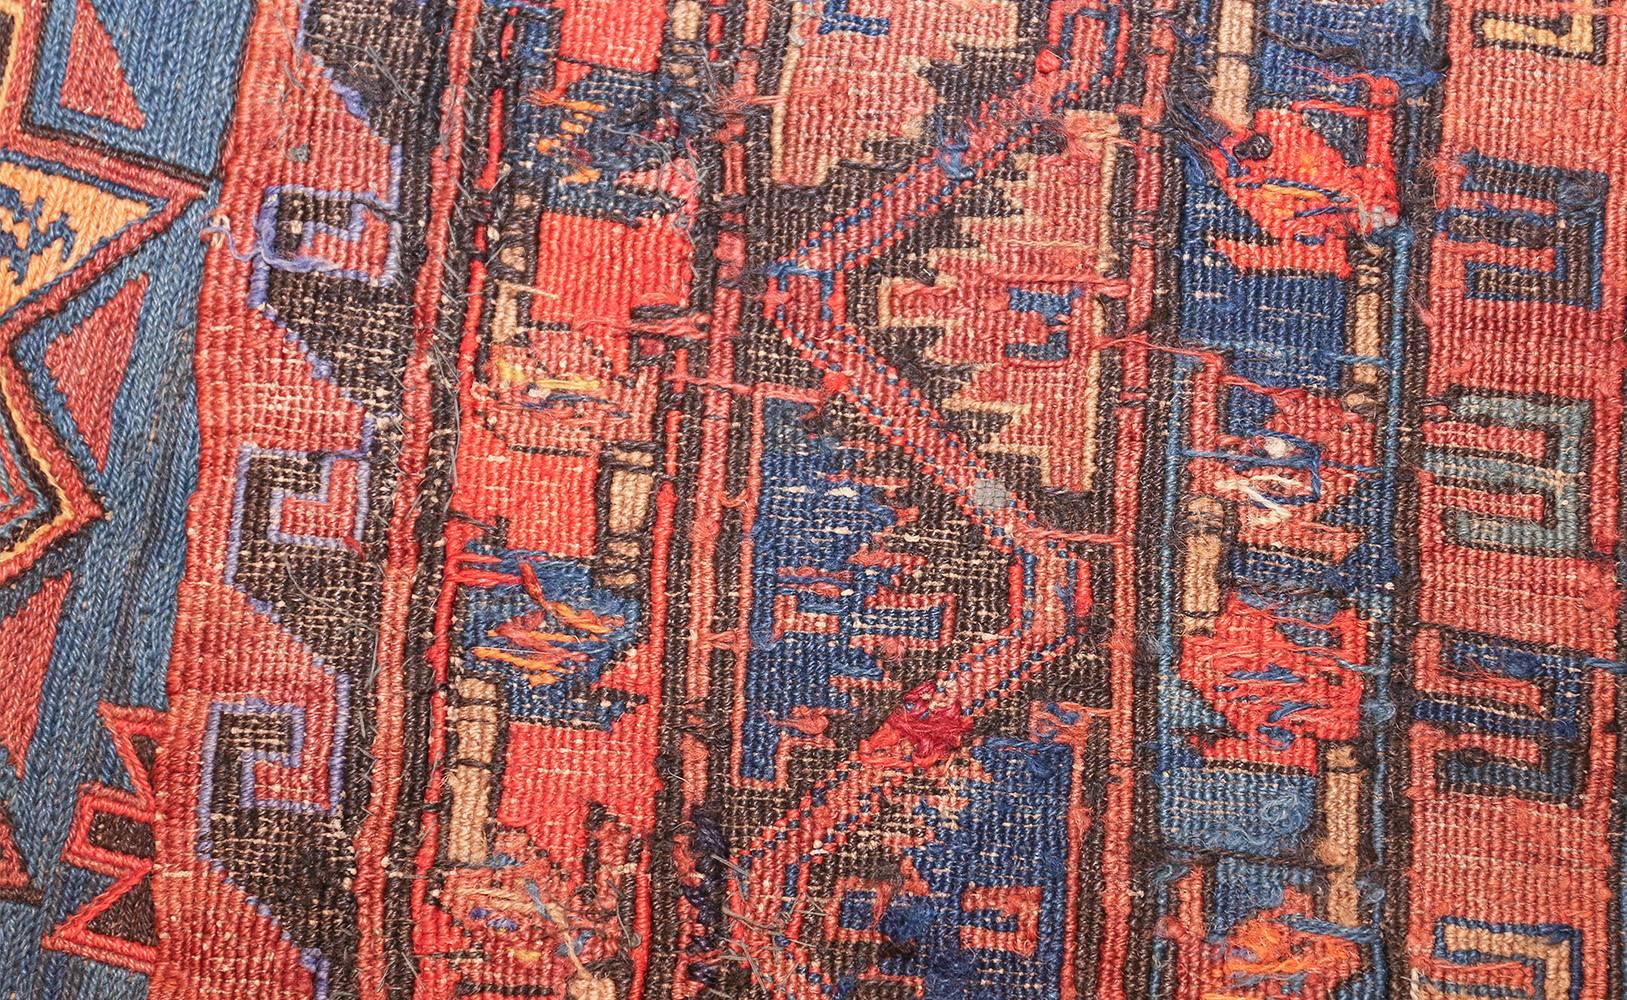 Antique Tribal Soumak rug, country of origin: Caucasus, circa early 20th century. Size: 6 ft 10 in x 11 ft 7 in (2.08 m x 3.53 m)

By using strong points of red and blue, the artist is able to convey a clear sense of opulence and luxury in this